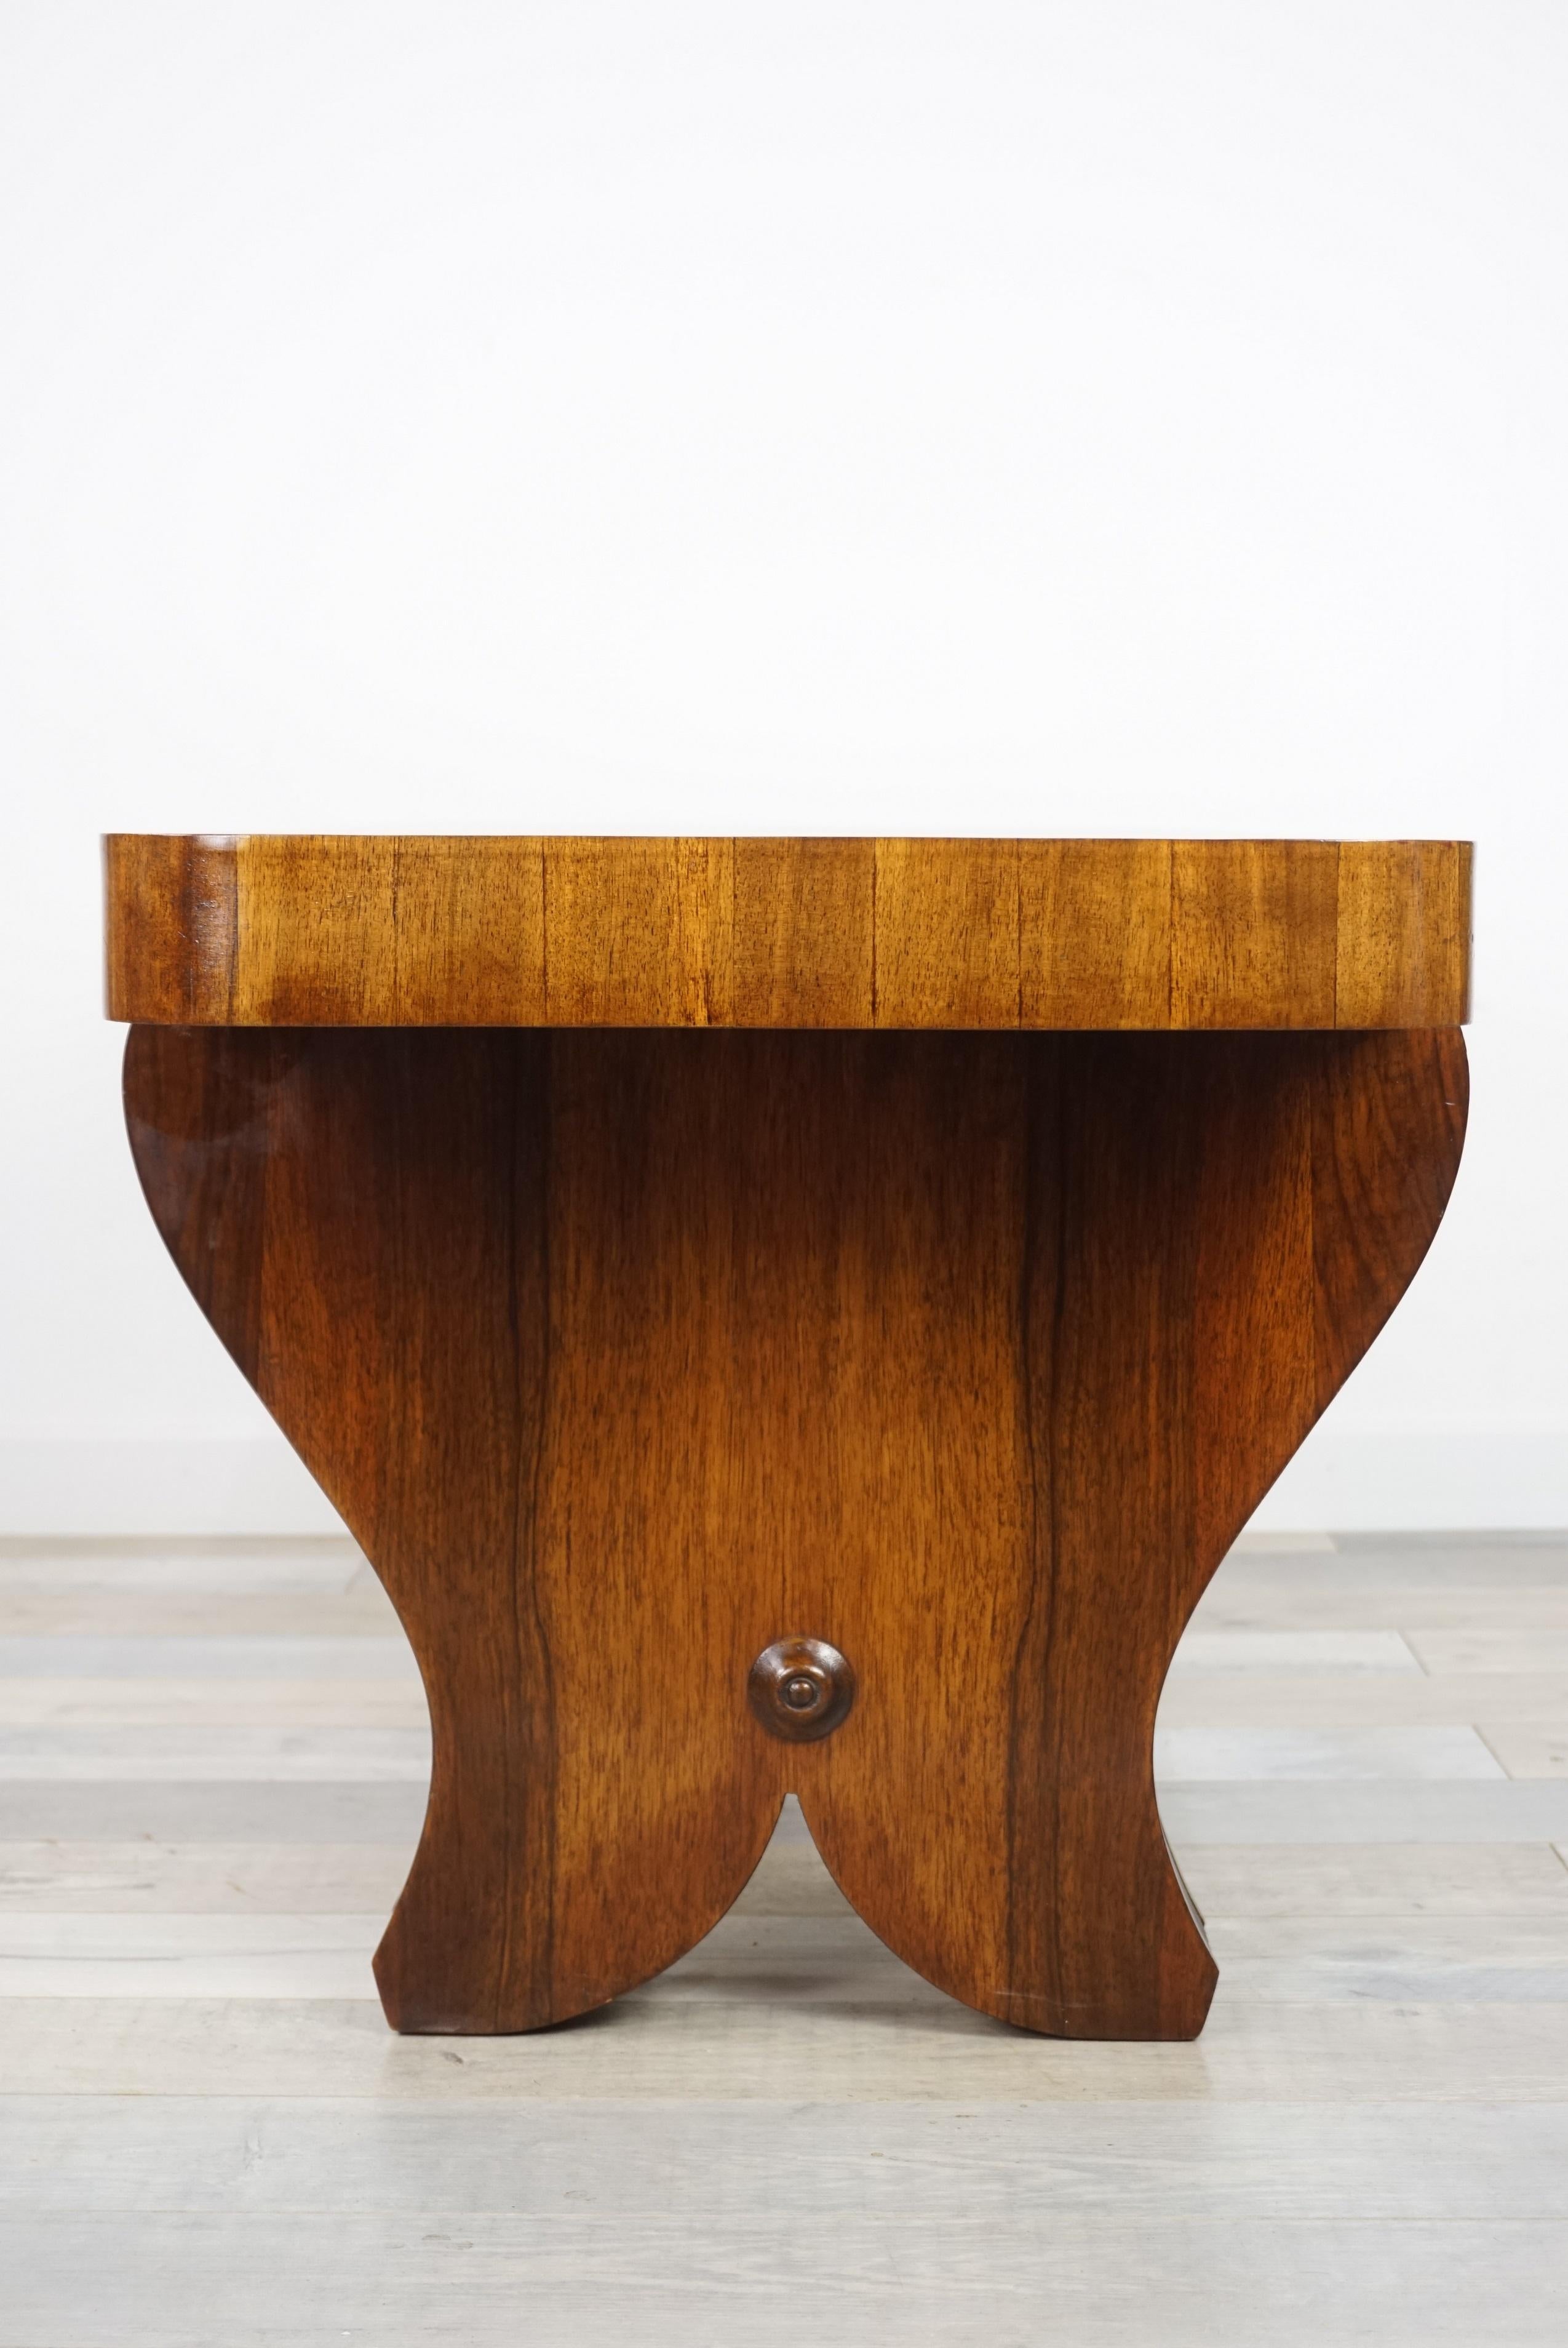 French Art Deco wooden coffee table from the beginning of the 20th century, elegant, curvaceous and rounded. In very good state.